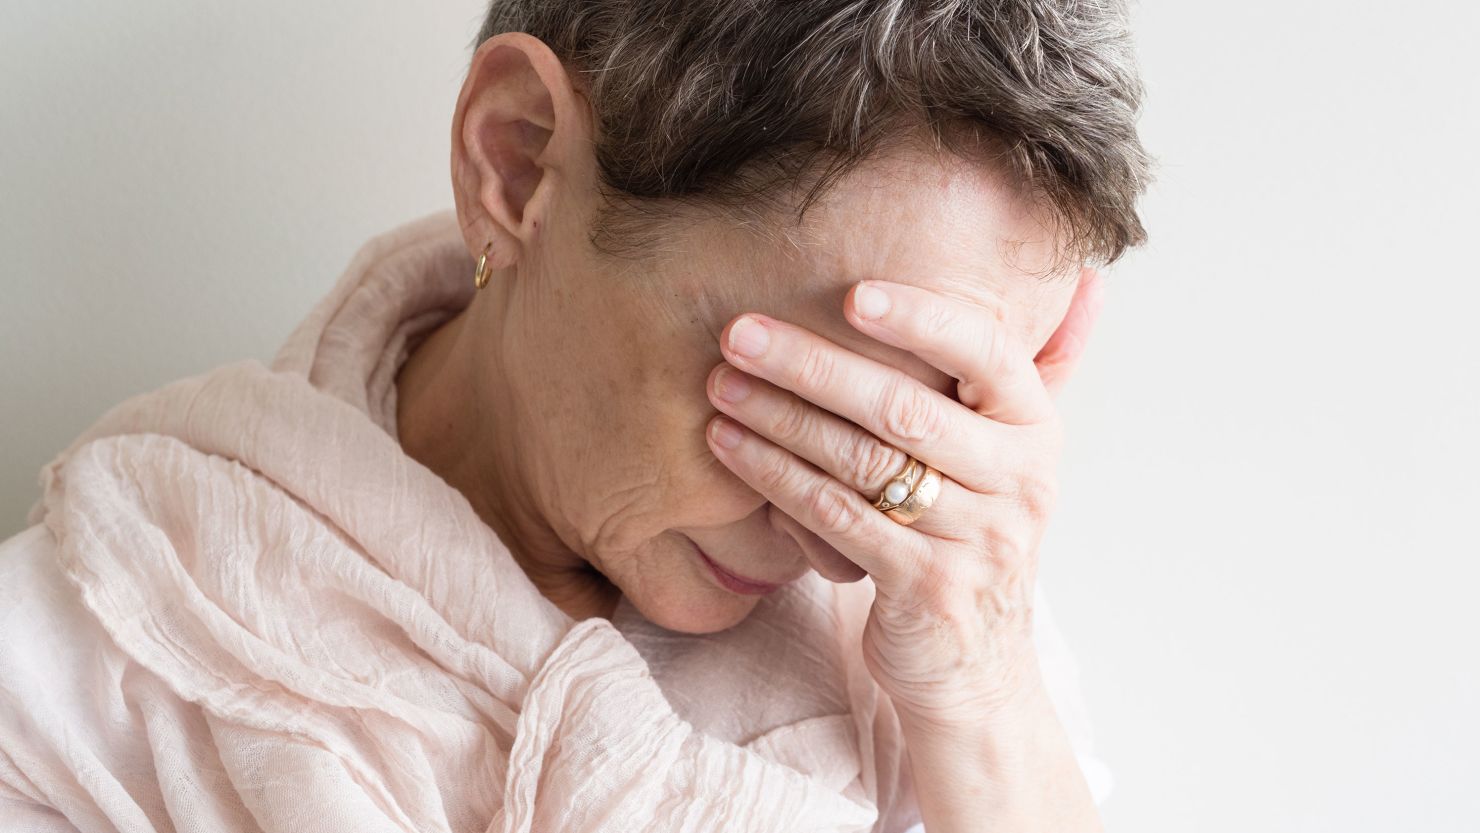 Older people with anxiety frequently don't get help. Here's why